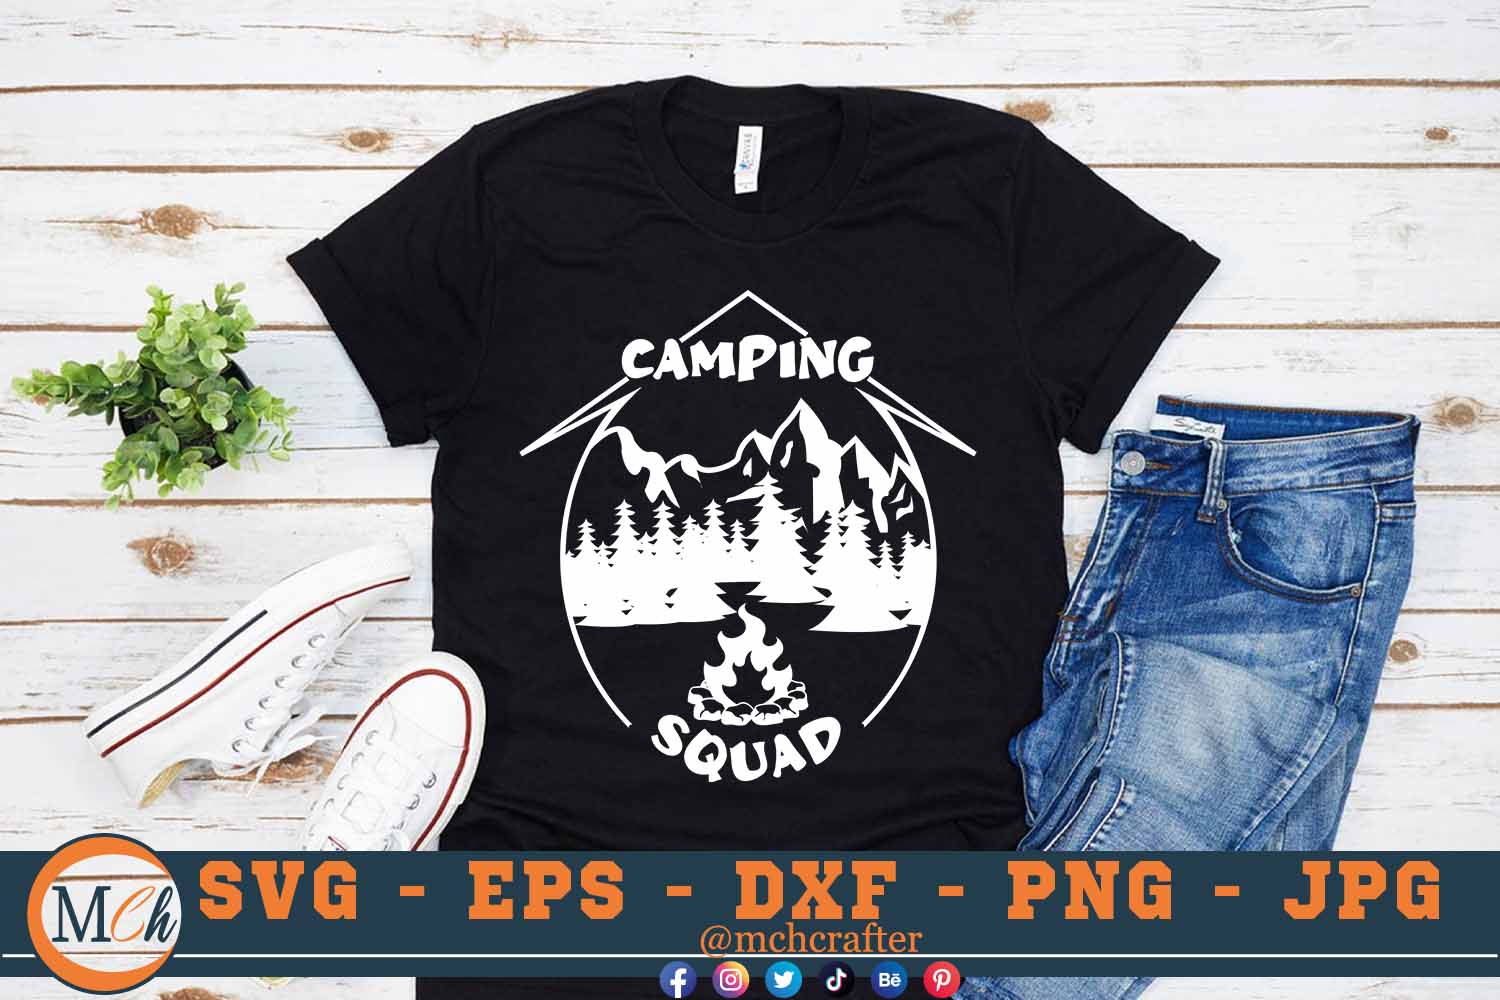 Bundle Of Outdoor Svg Camping Svg Bundle Mountains Svg Adventure Svg Outdoor Quotes Svg Mch Crafter